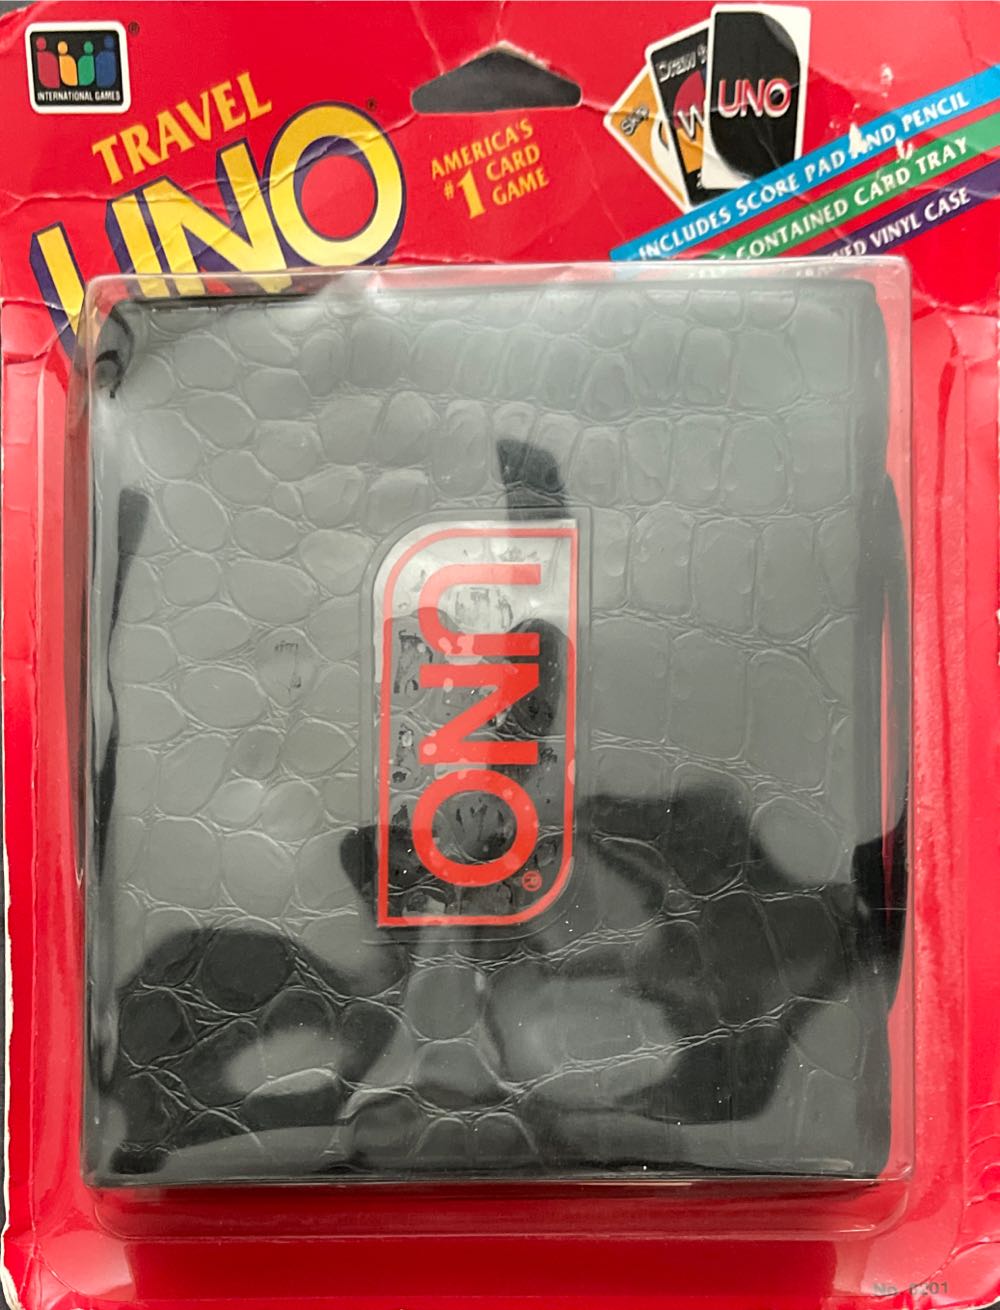 Travel Uno  board game collectible [Barcode 078206082014] - Main Image 1